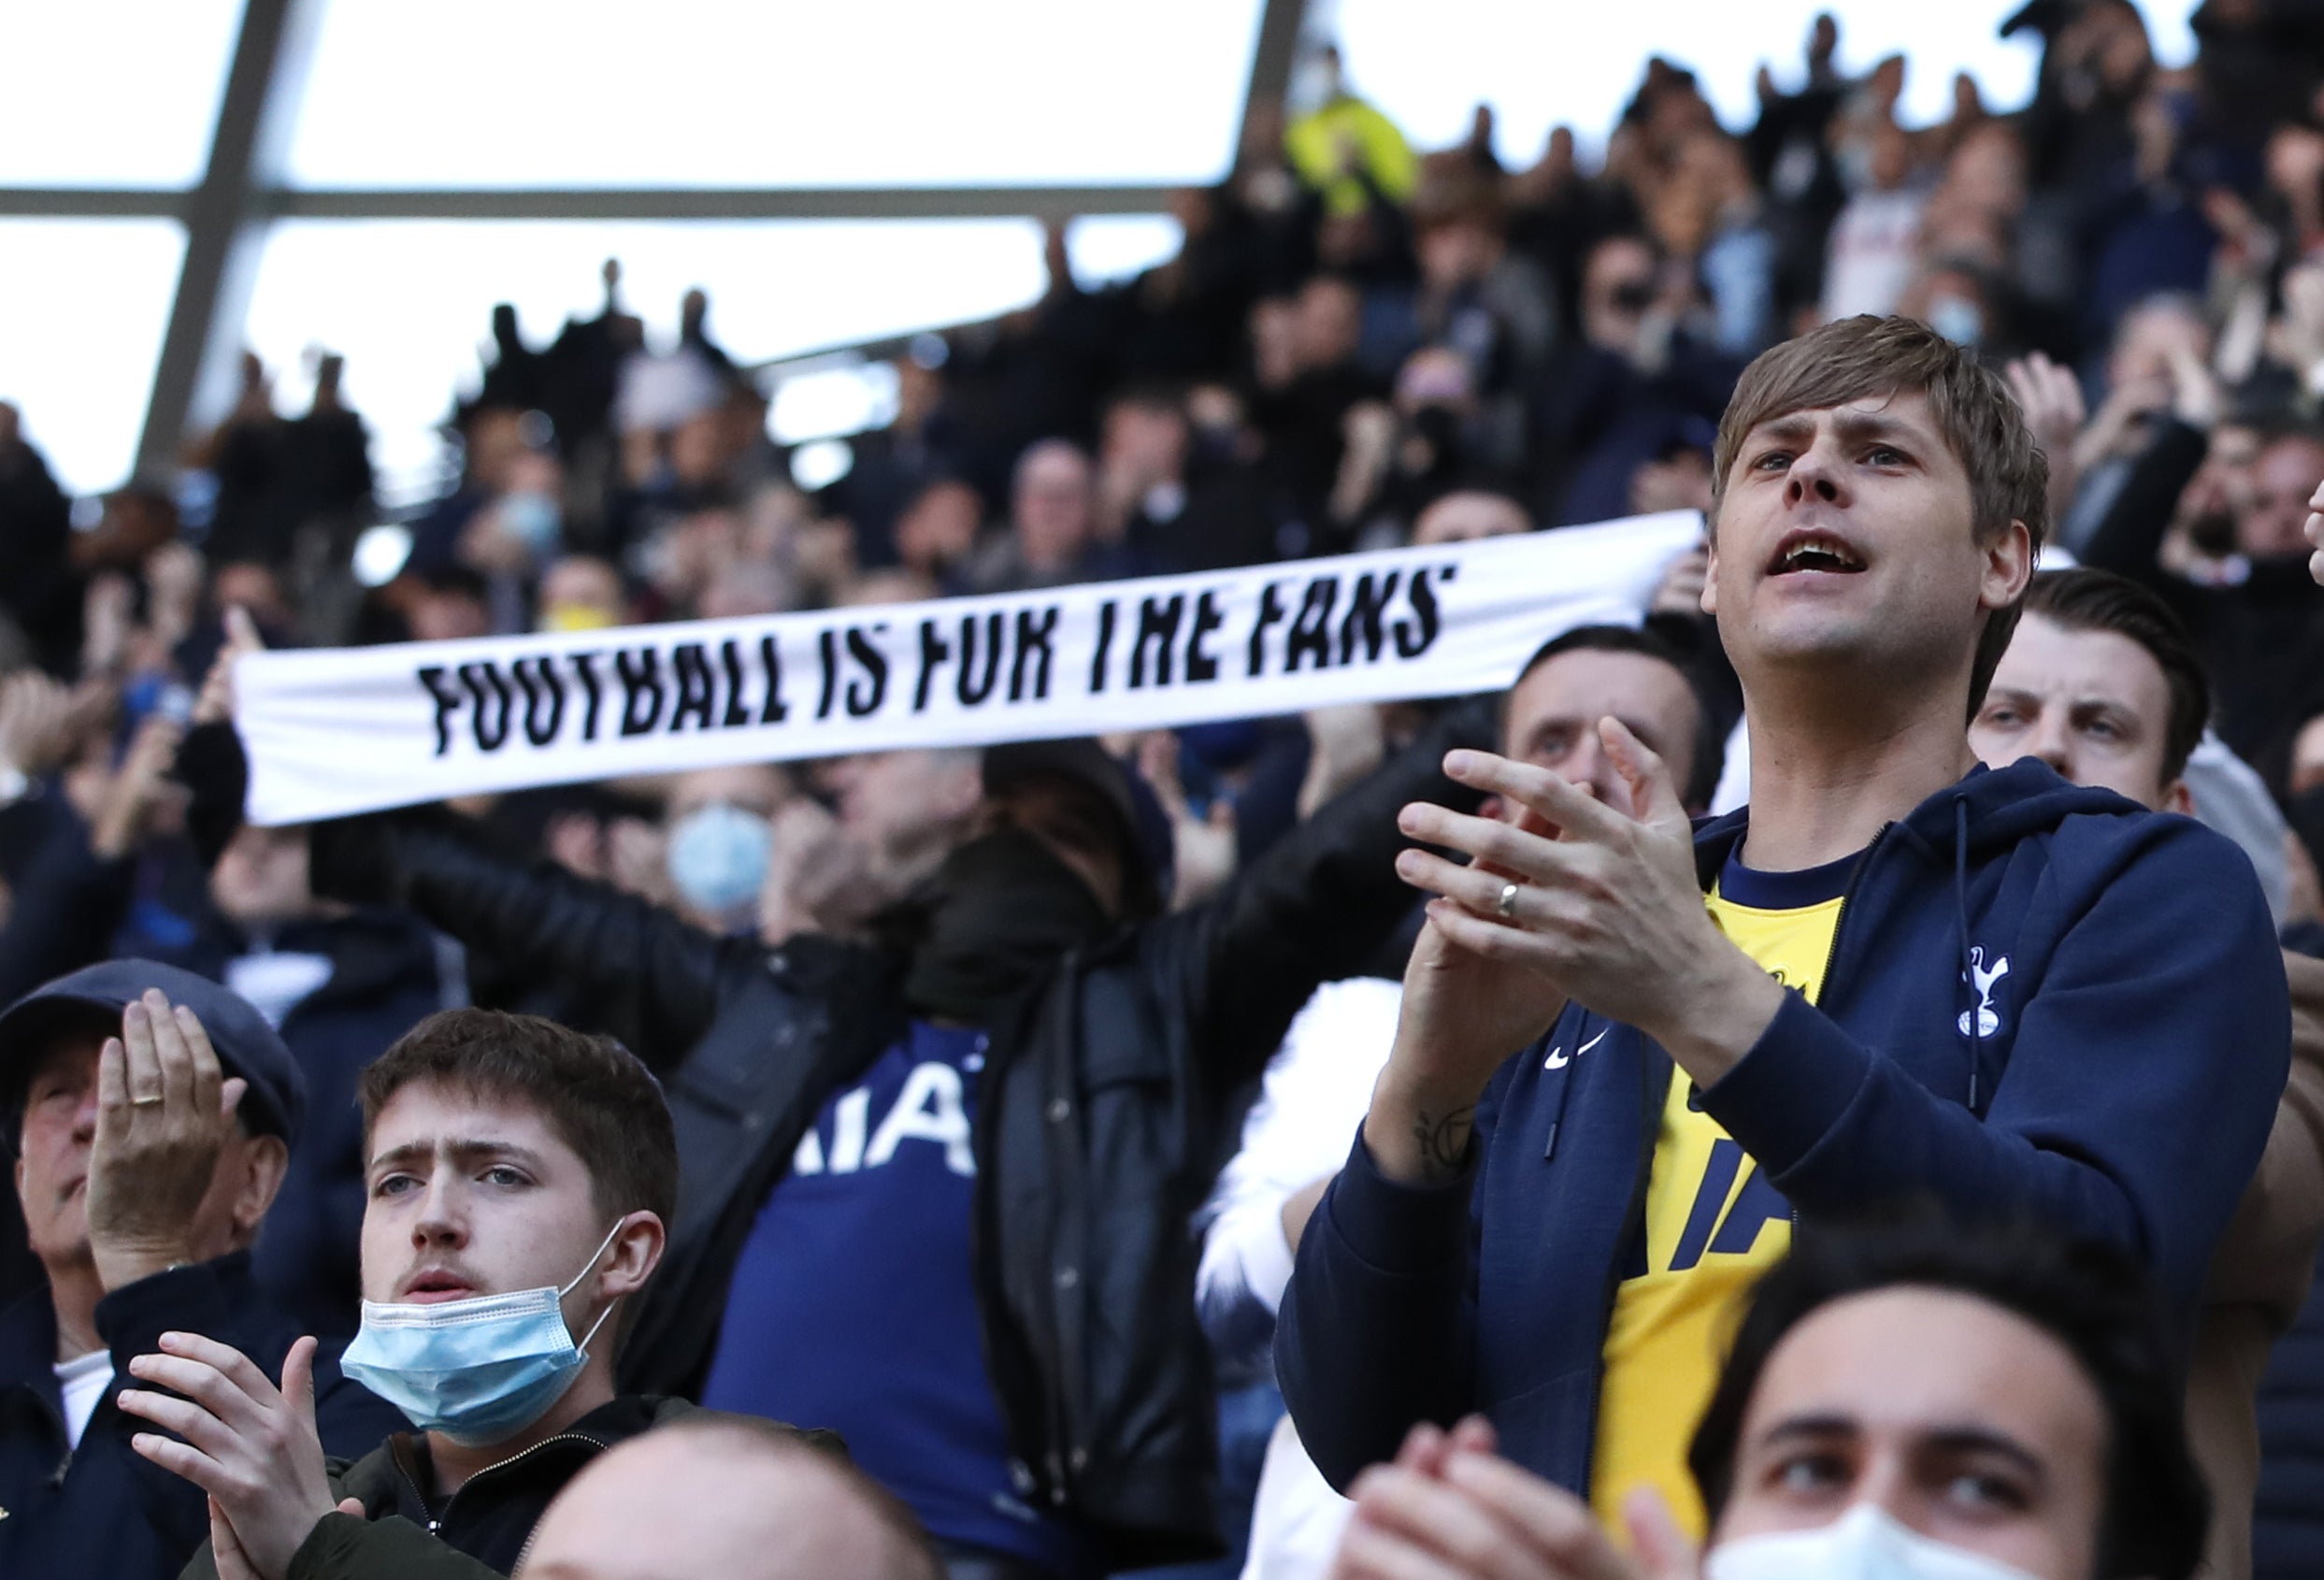 Tottenham fans are unhappy with how the club is being run, according to a survey (Paul Childs/PA)